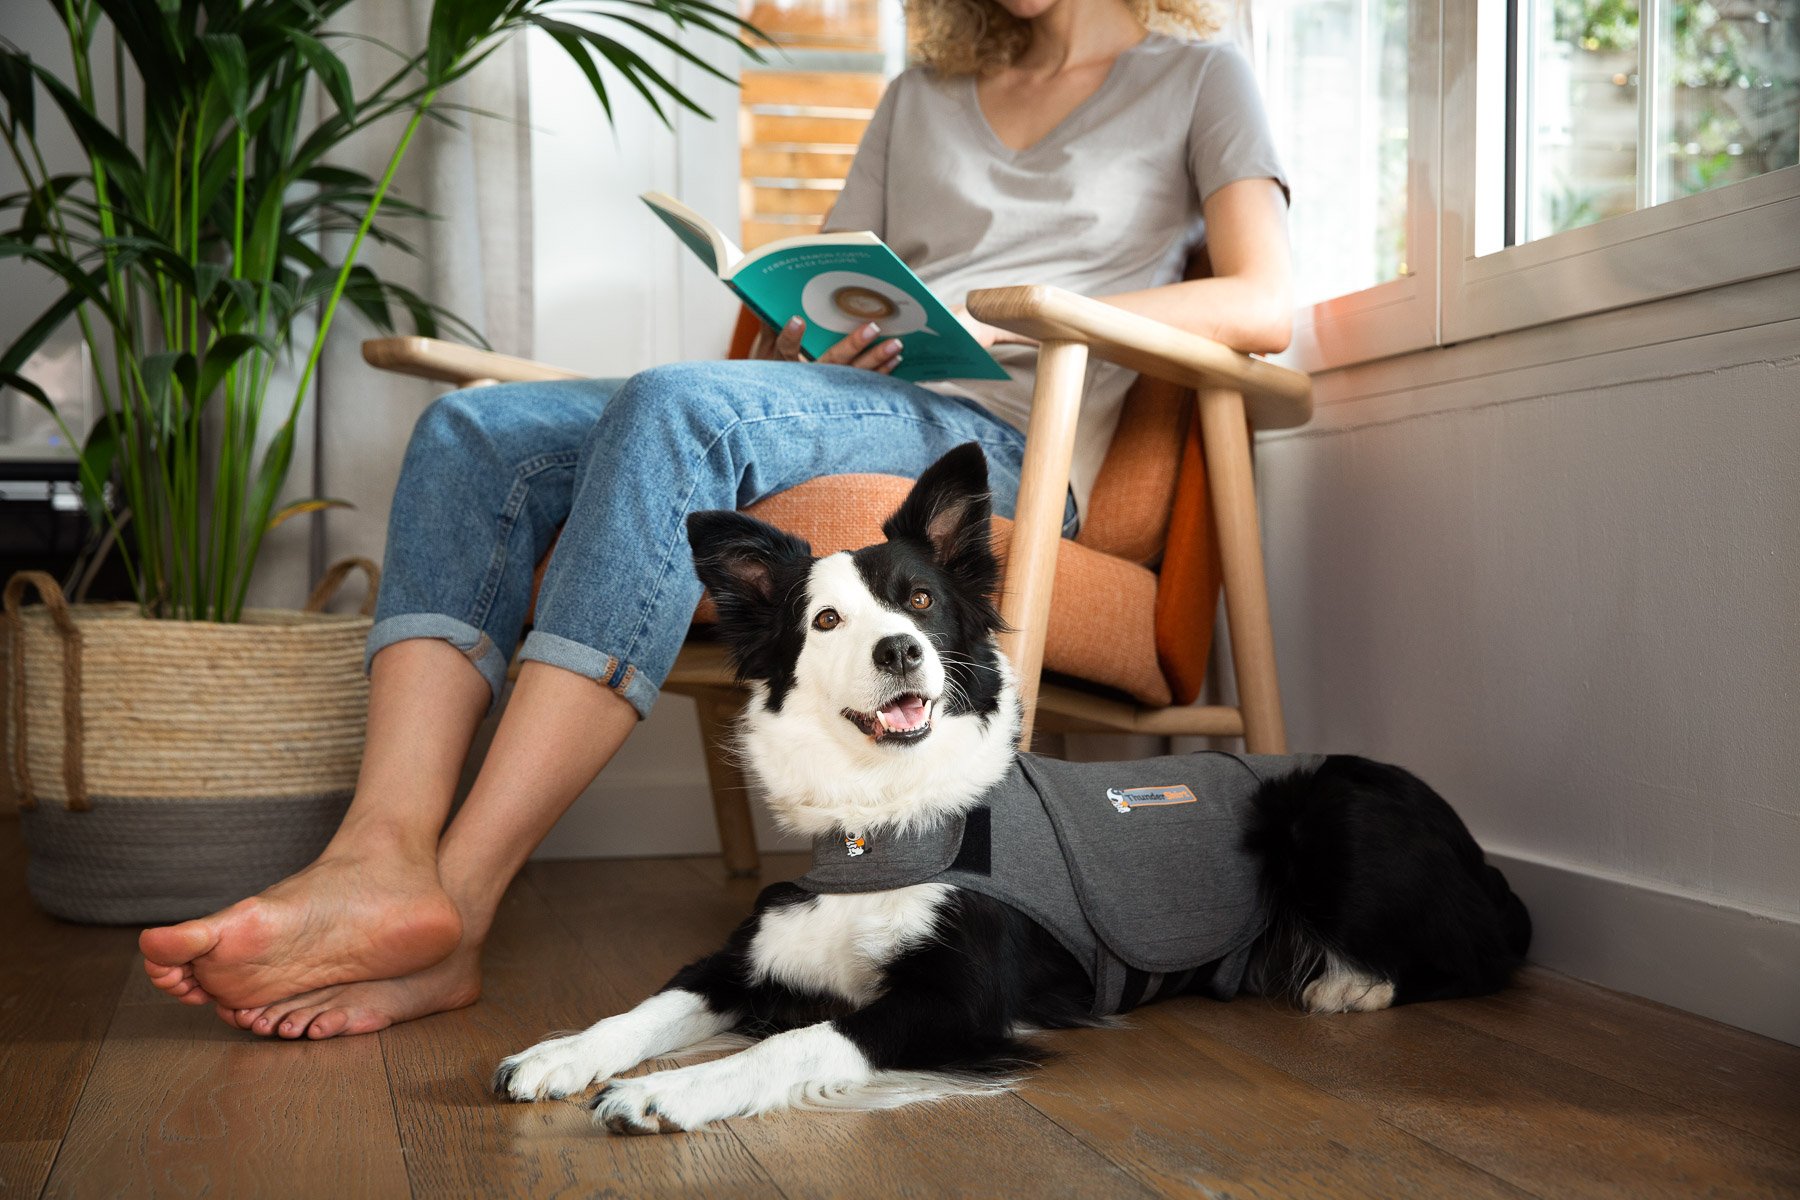 thundershirt-vest-calming-dogs-anxiety-border-collie-with-owner-chilling-pet-photos.jpg